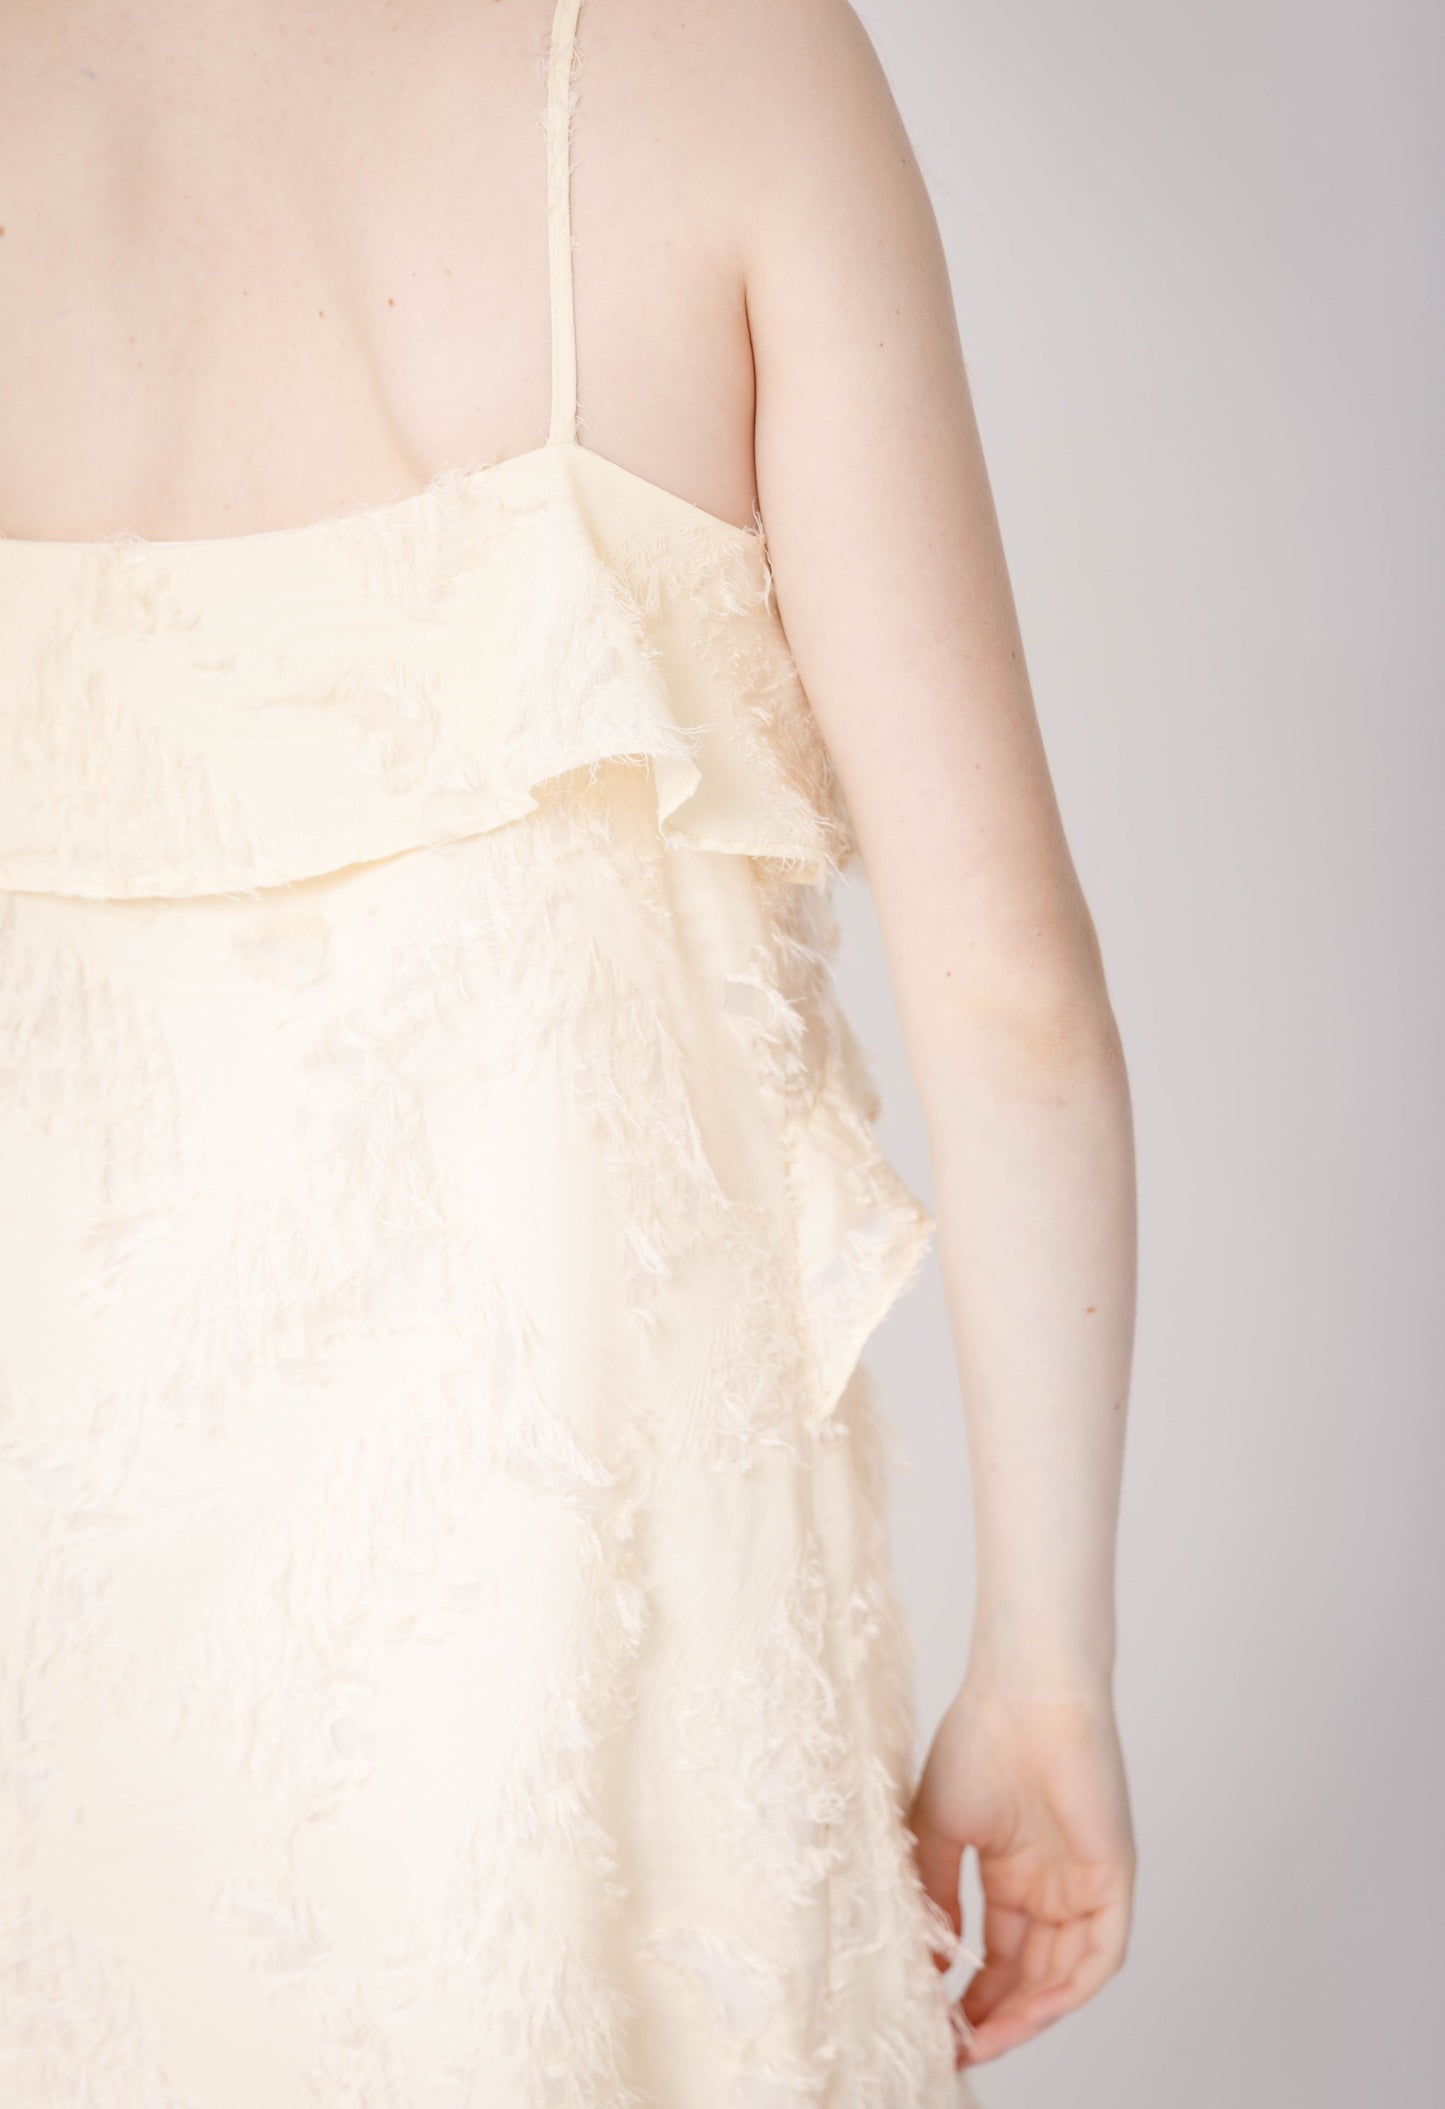 Elvina Dress in Pale Yellow